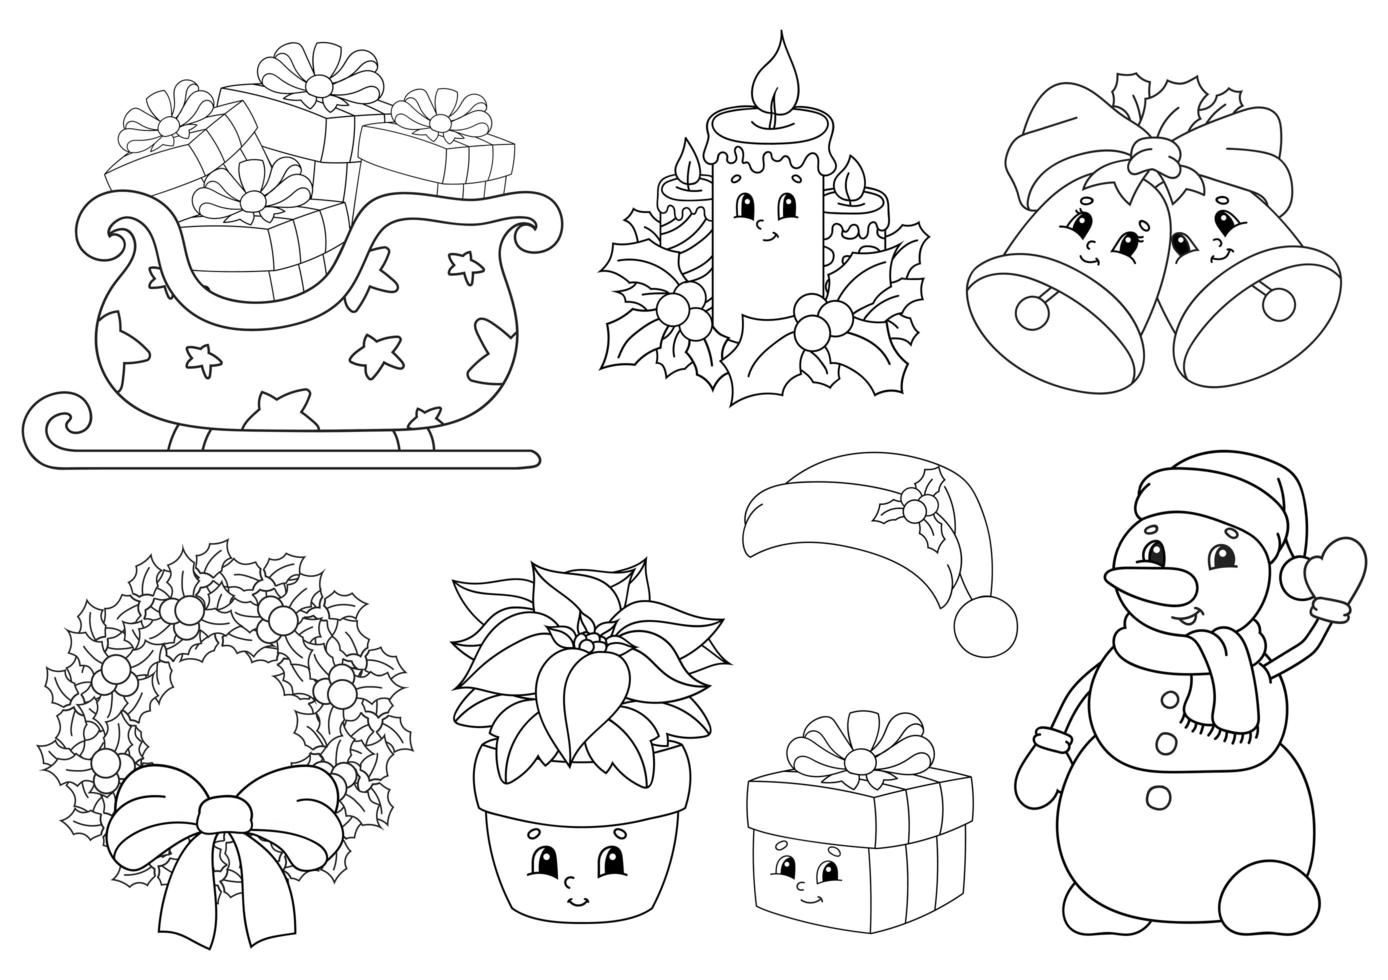 Coloring book for kids. Merry Christmas theme. Cheerful characters. Vector illustration. Cute cartoon style. Black contour silhouette. Isolated on white background.